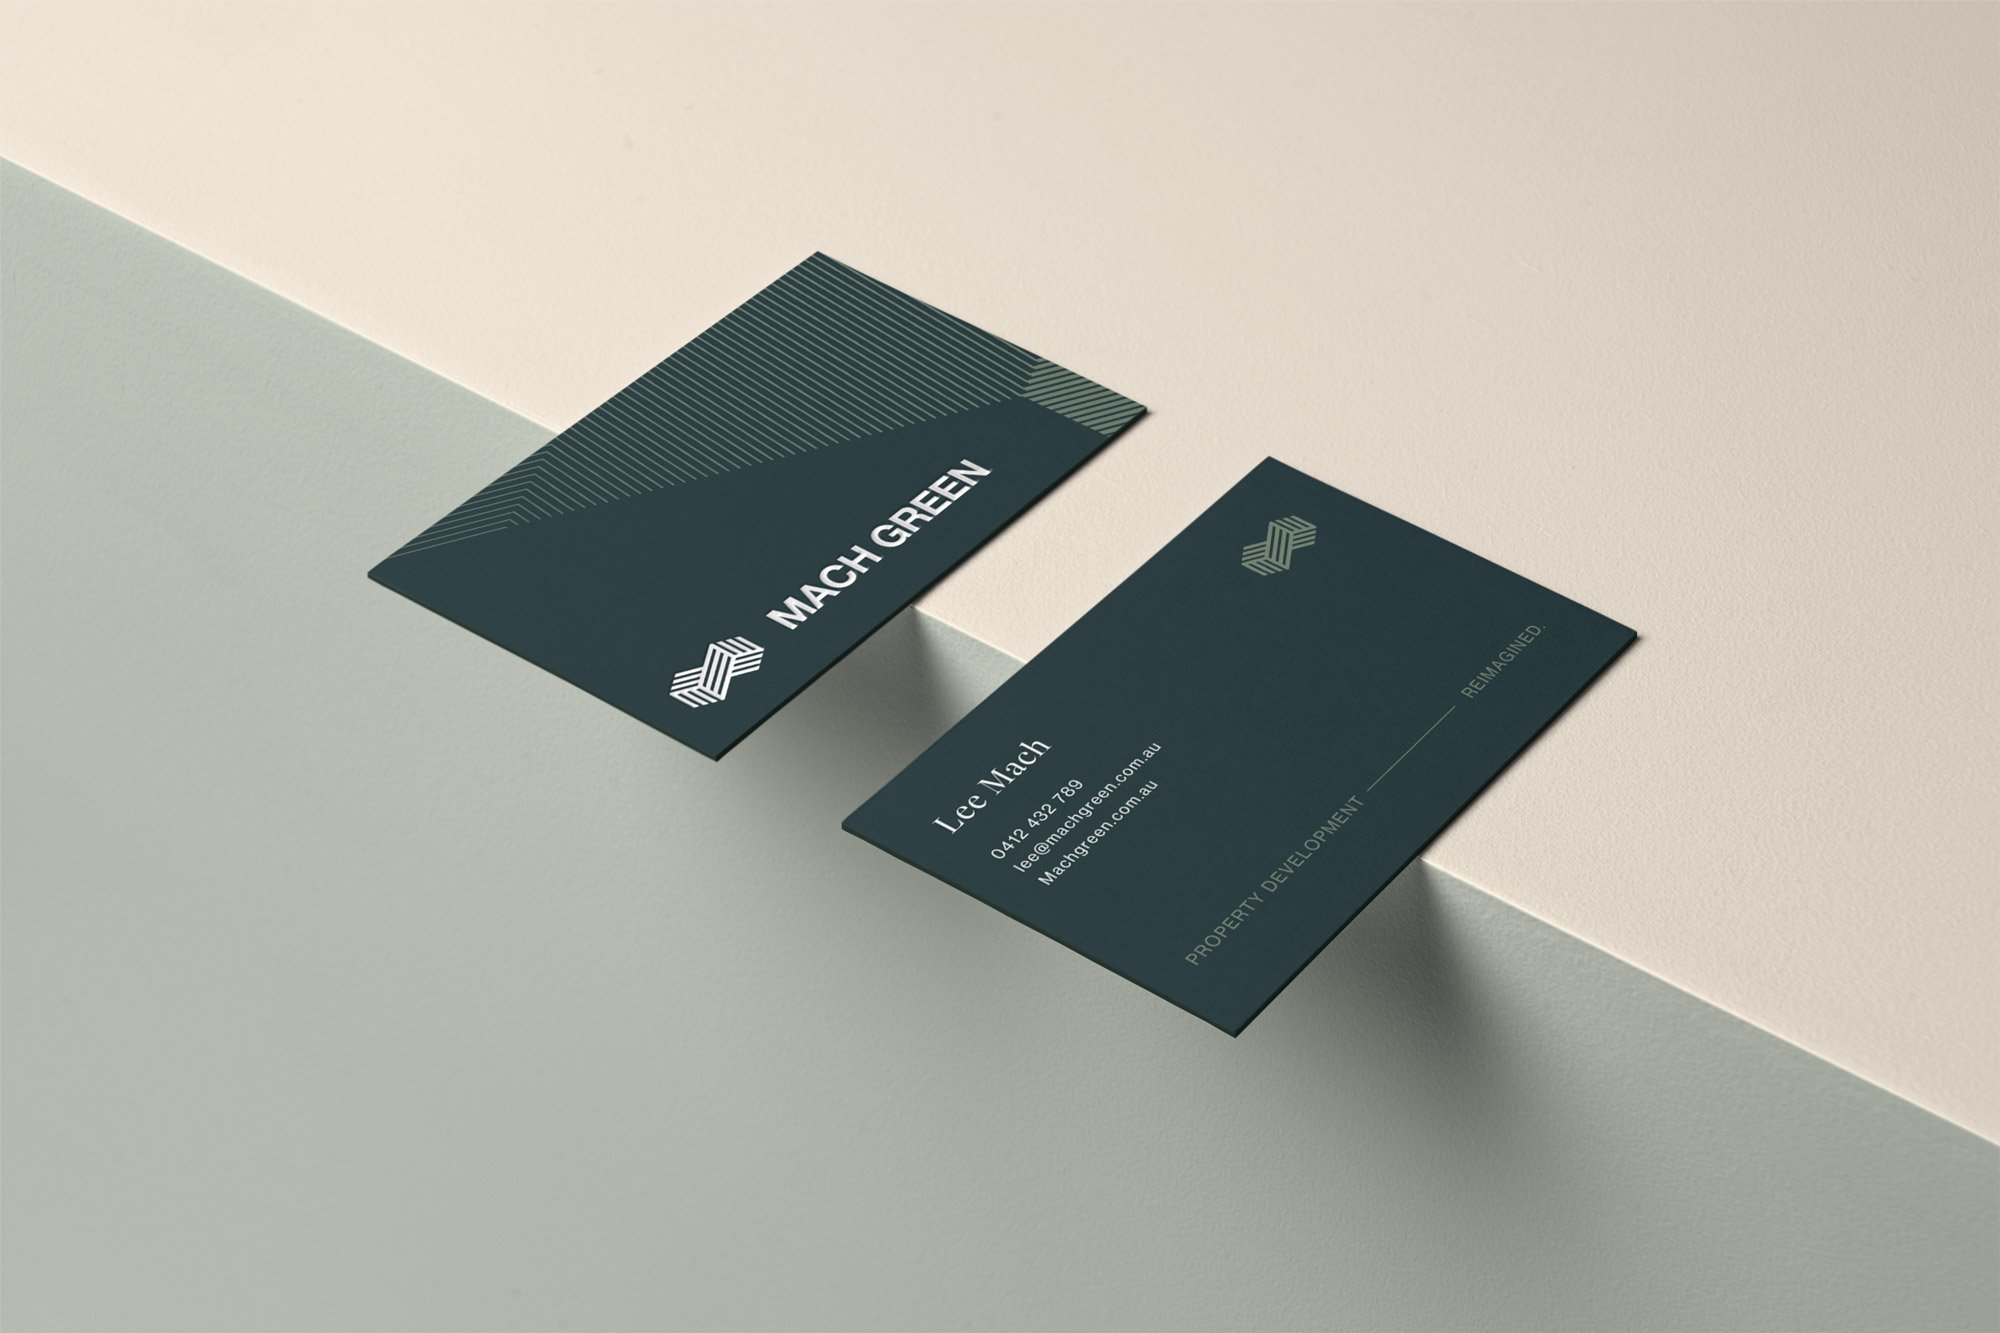 Mach Green Property Developer branding applied to business cards